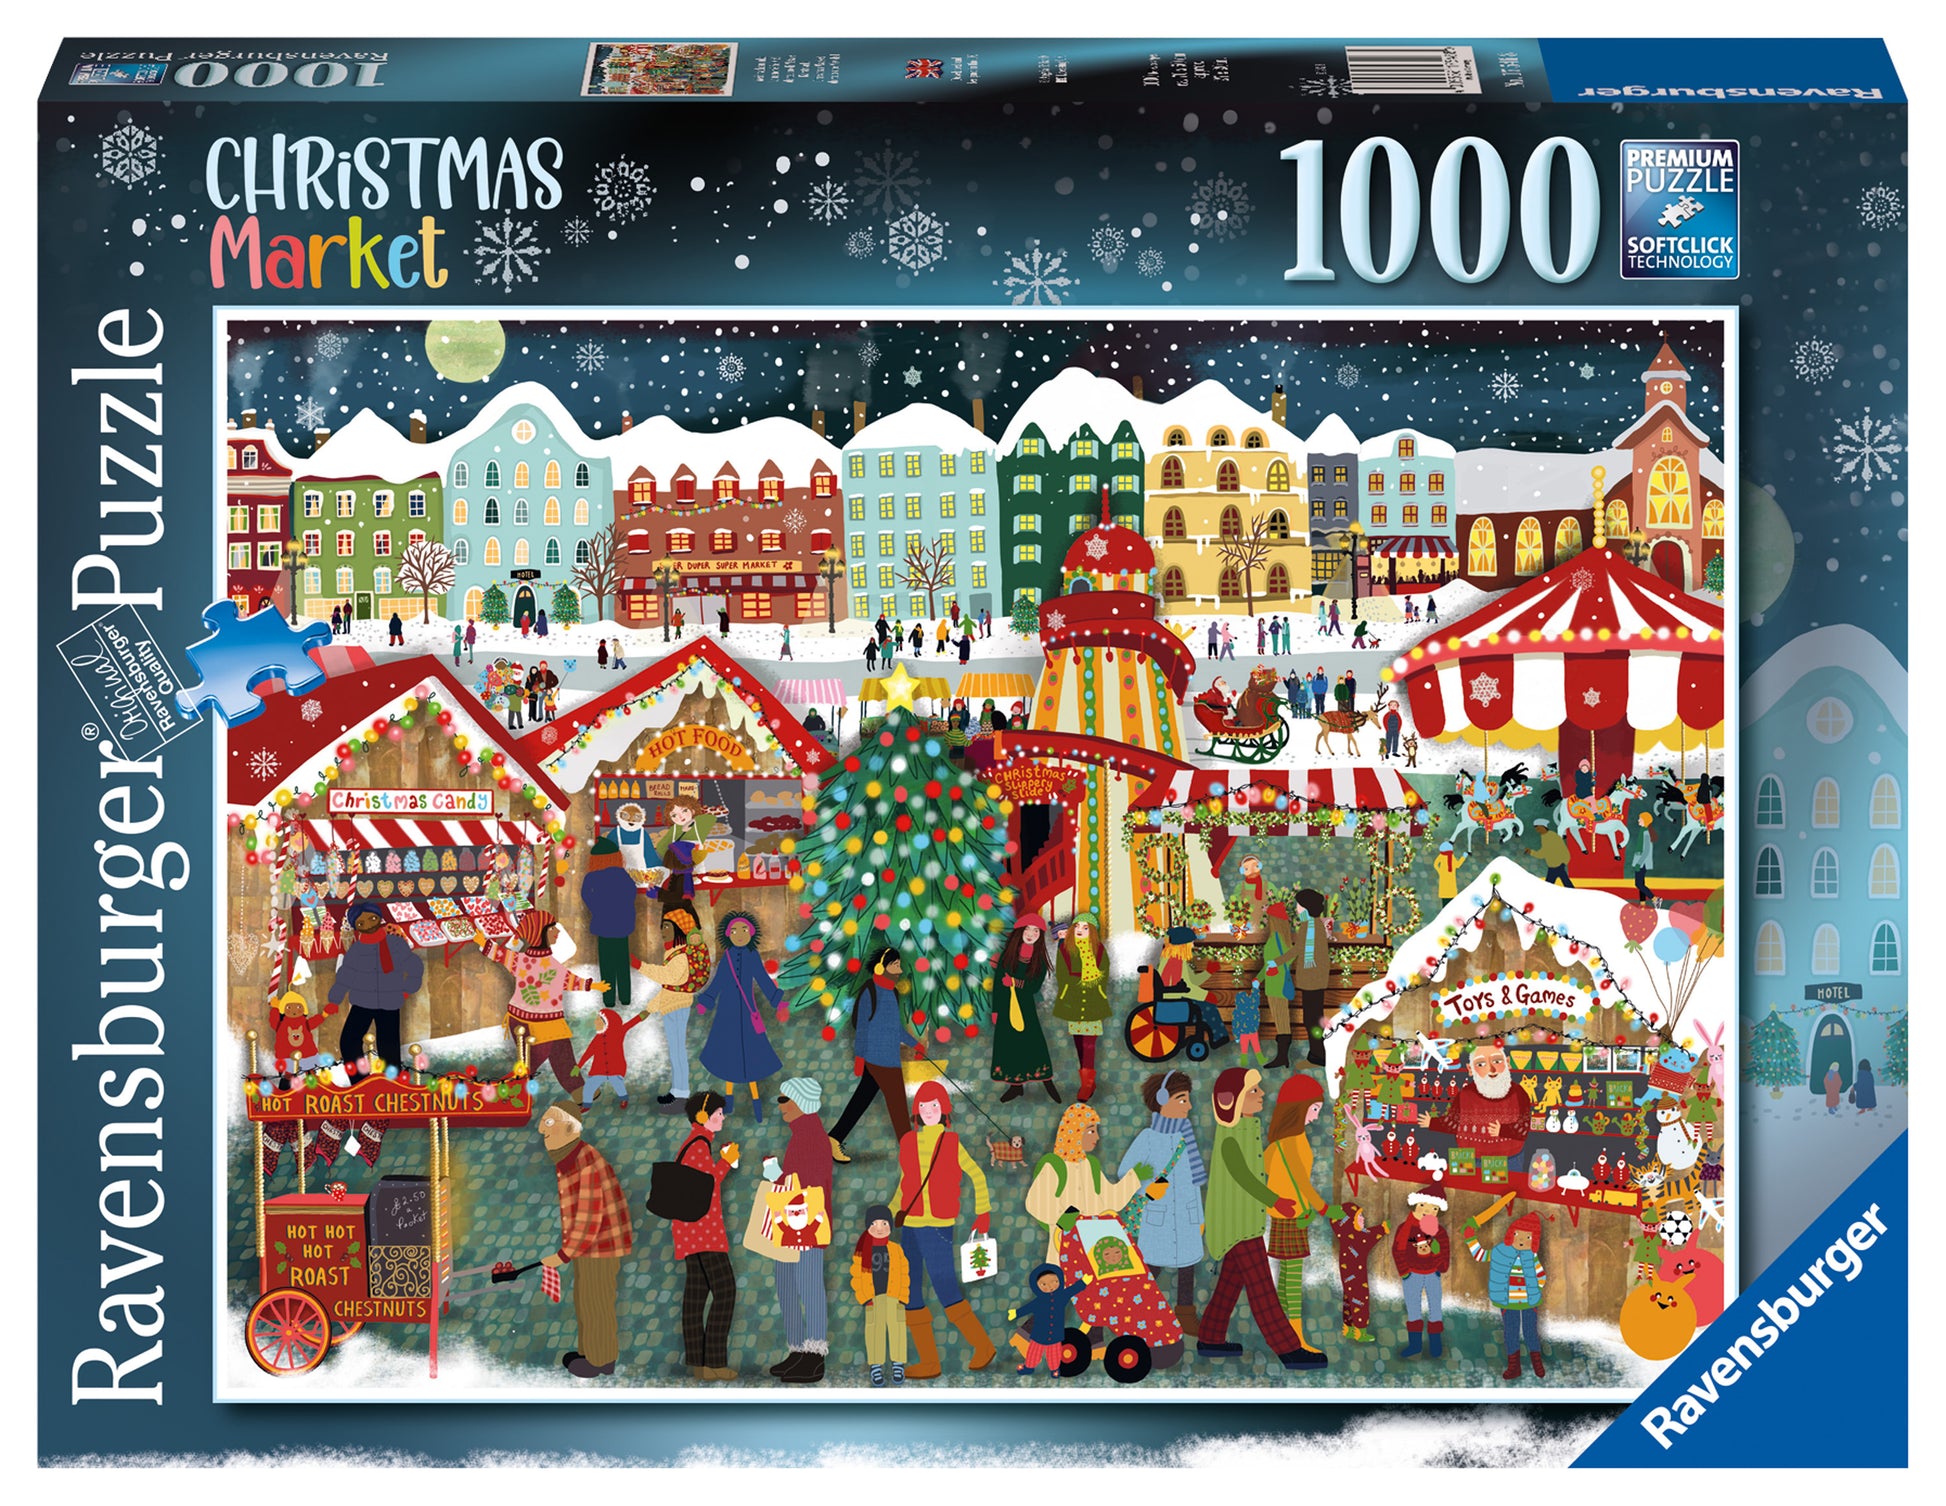 Jigsaw Puzzle Online Store - Buy Jigsaw Puzzles - Ravensburger Puzzles